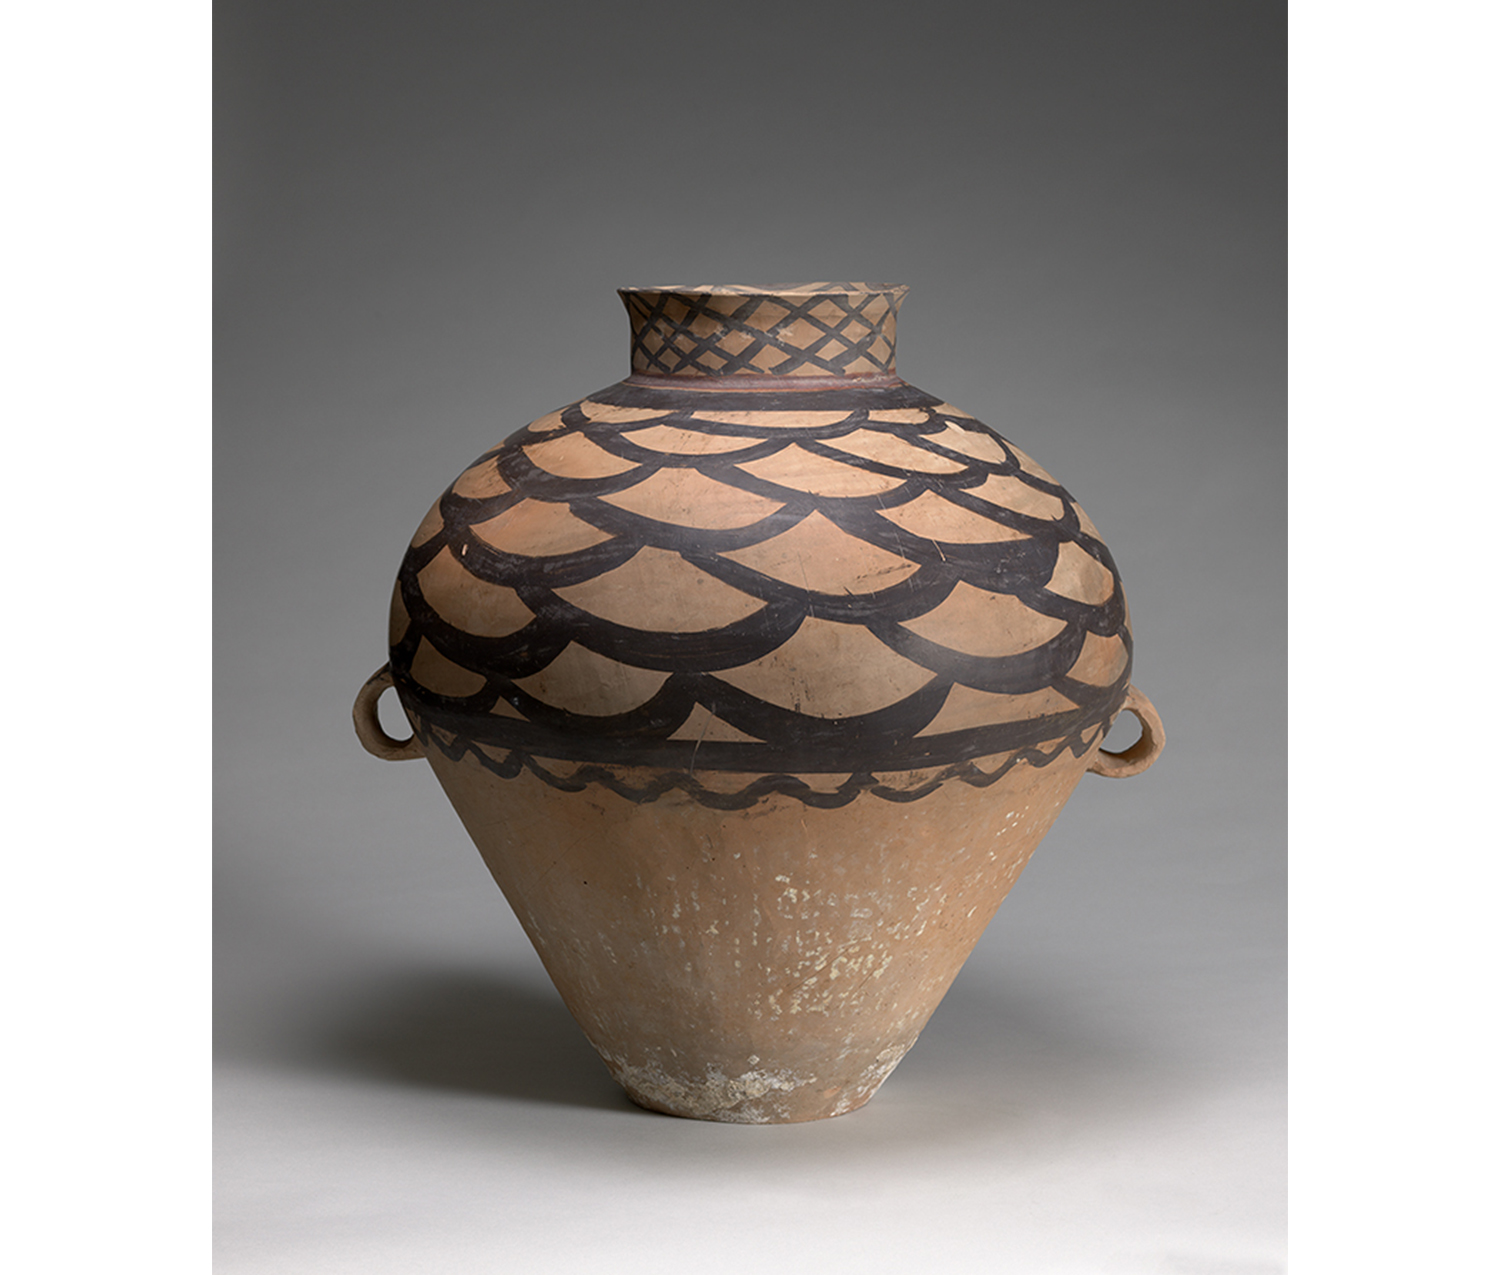 beige earthenware vessel with painted scalloped decoration along the top